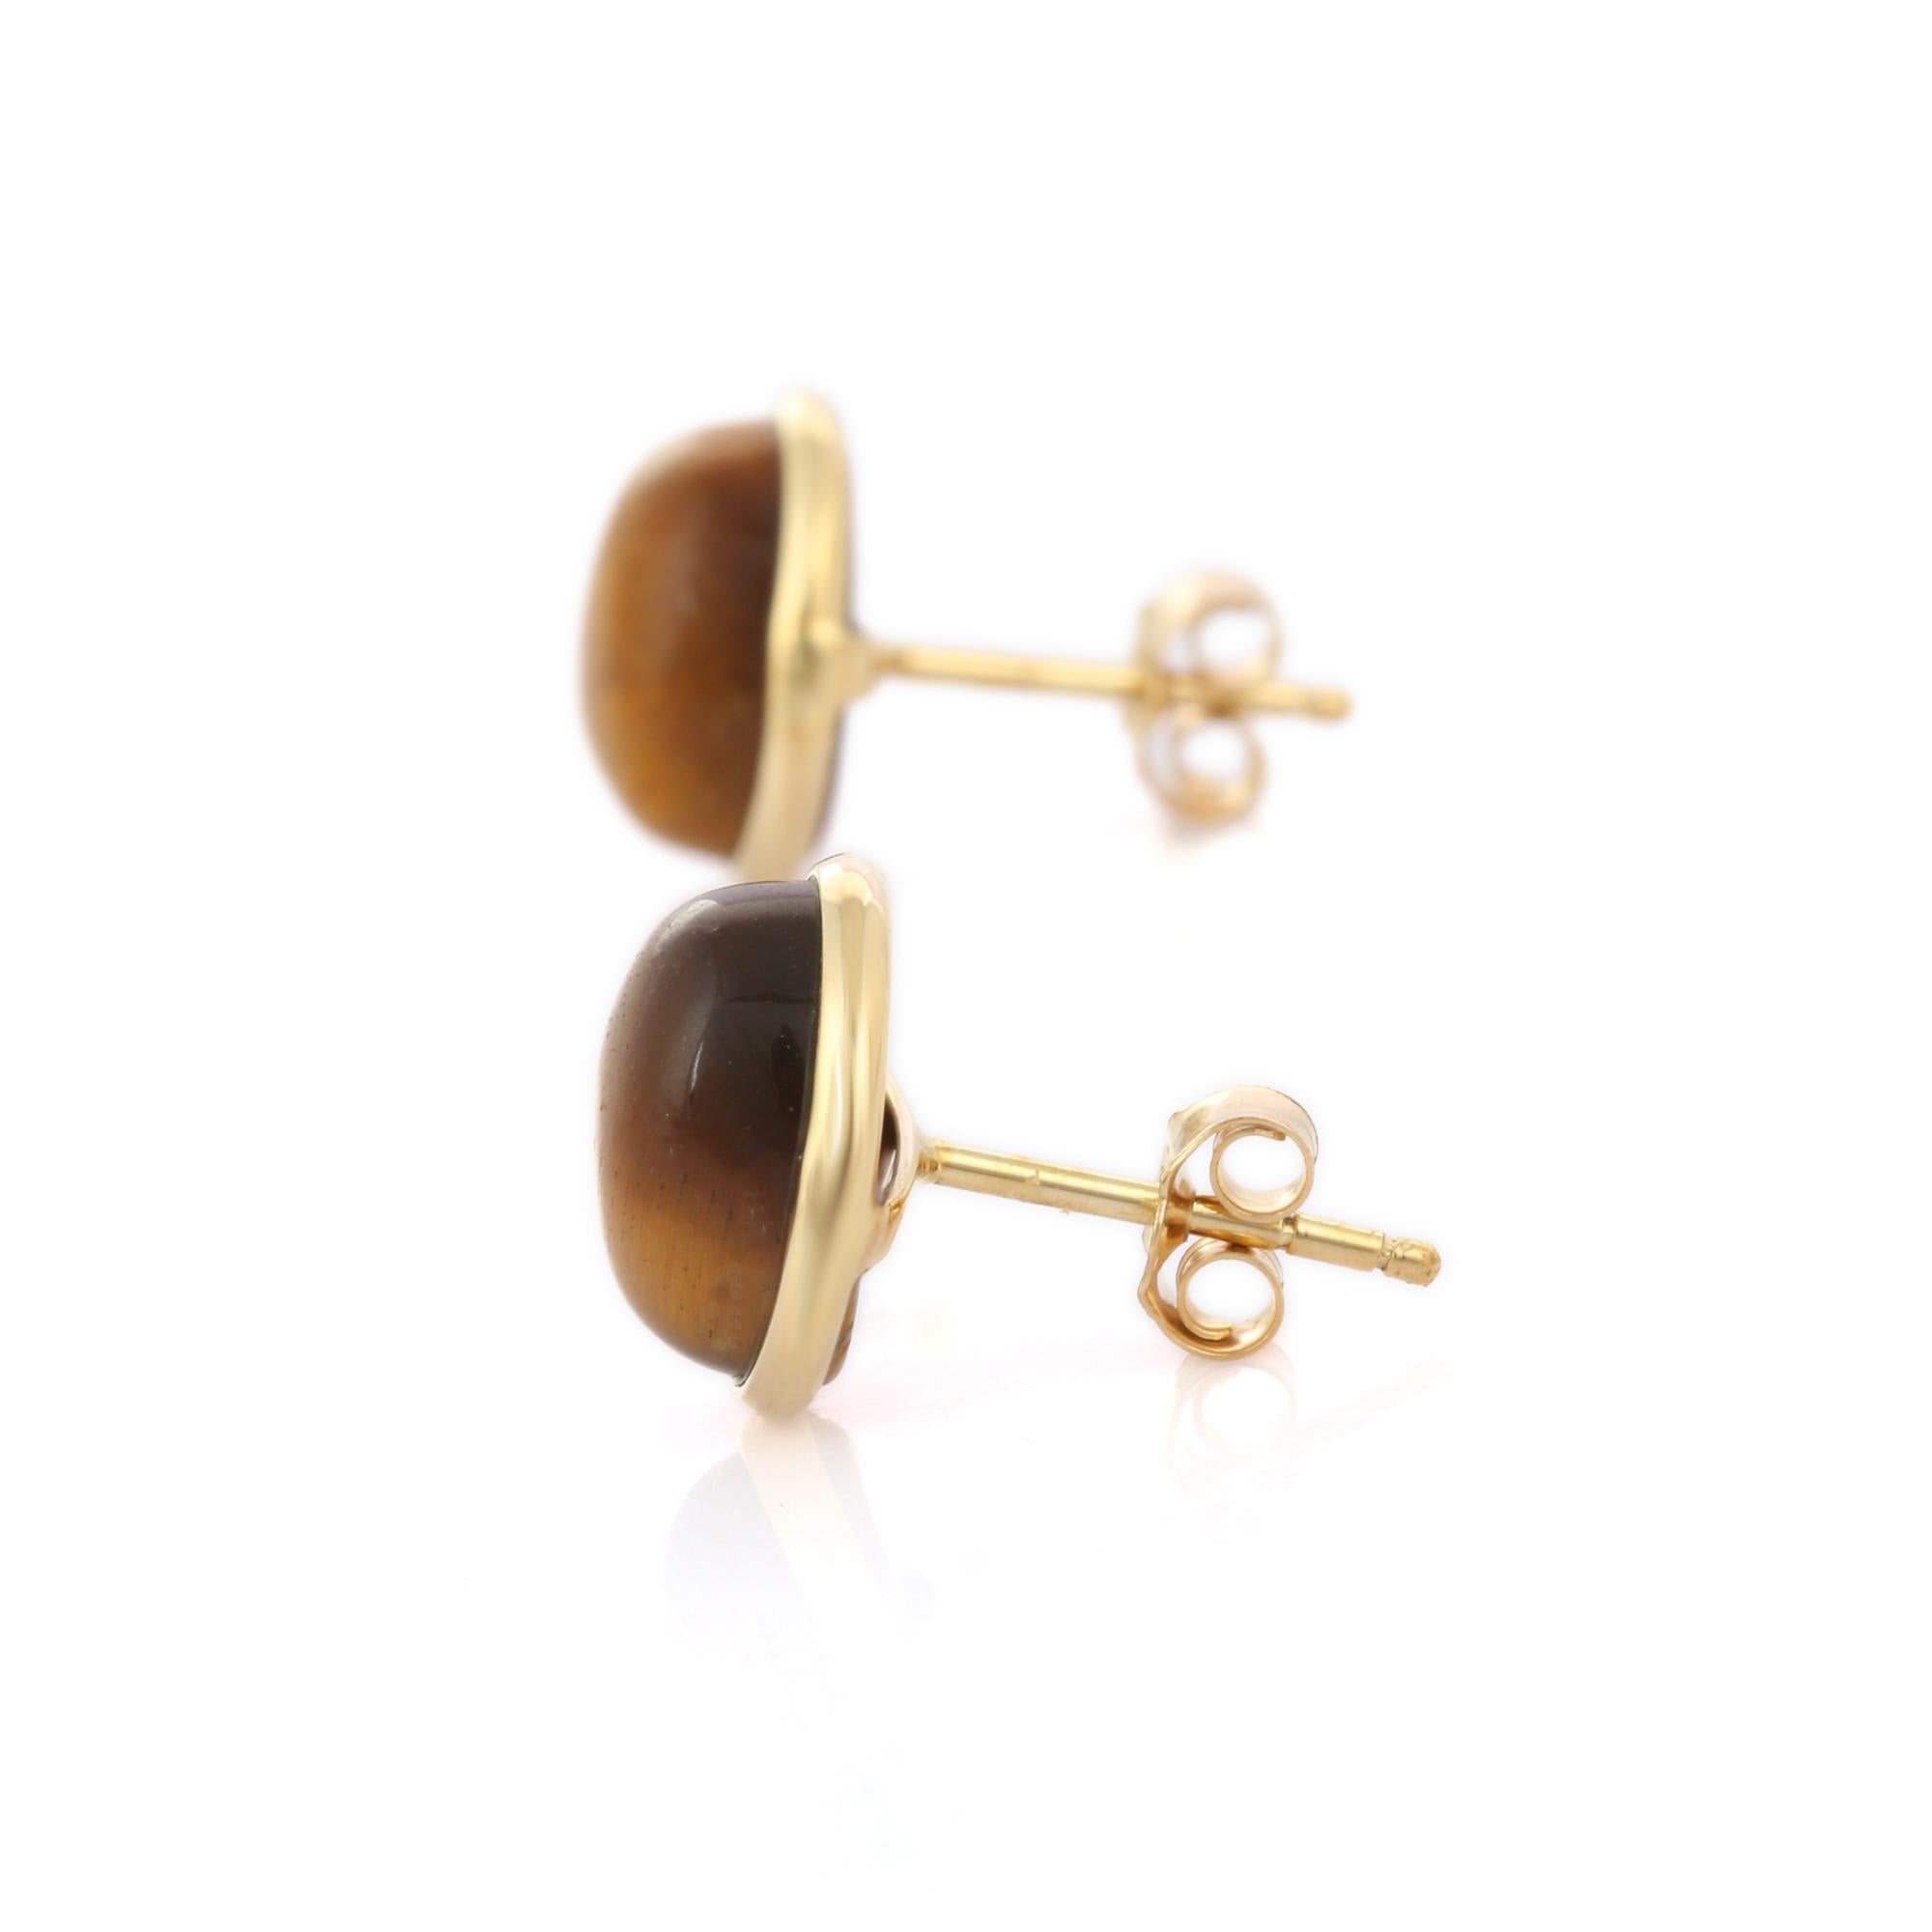 Studs create a subtle beauty while showcasing the colors of the natural precious gemstones making a statement.
Oval cut genuine tiger's eye cabochon stud earrings in 18K gold. Embrace your look with these stunning pair of earrings suitable for any